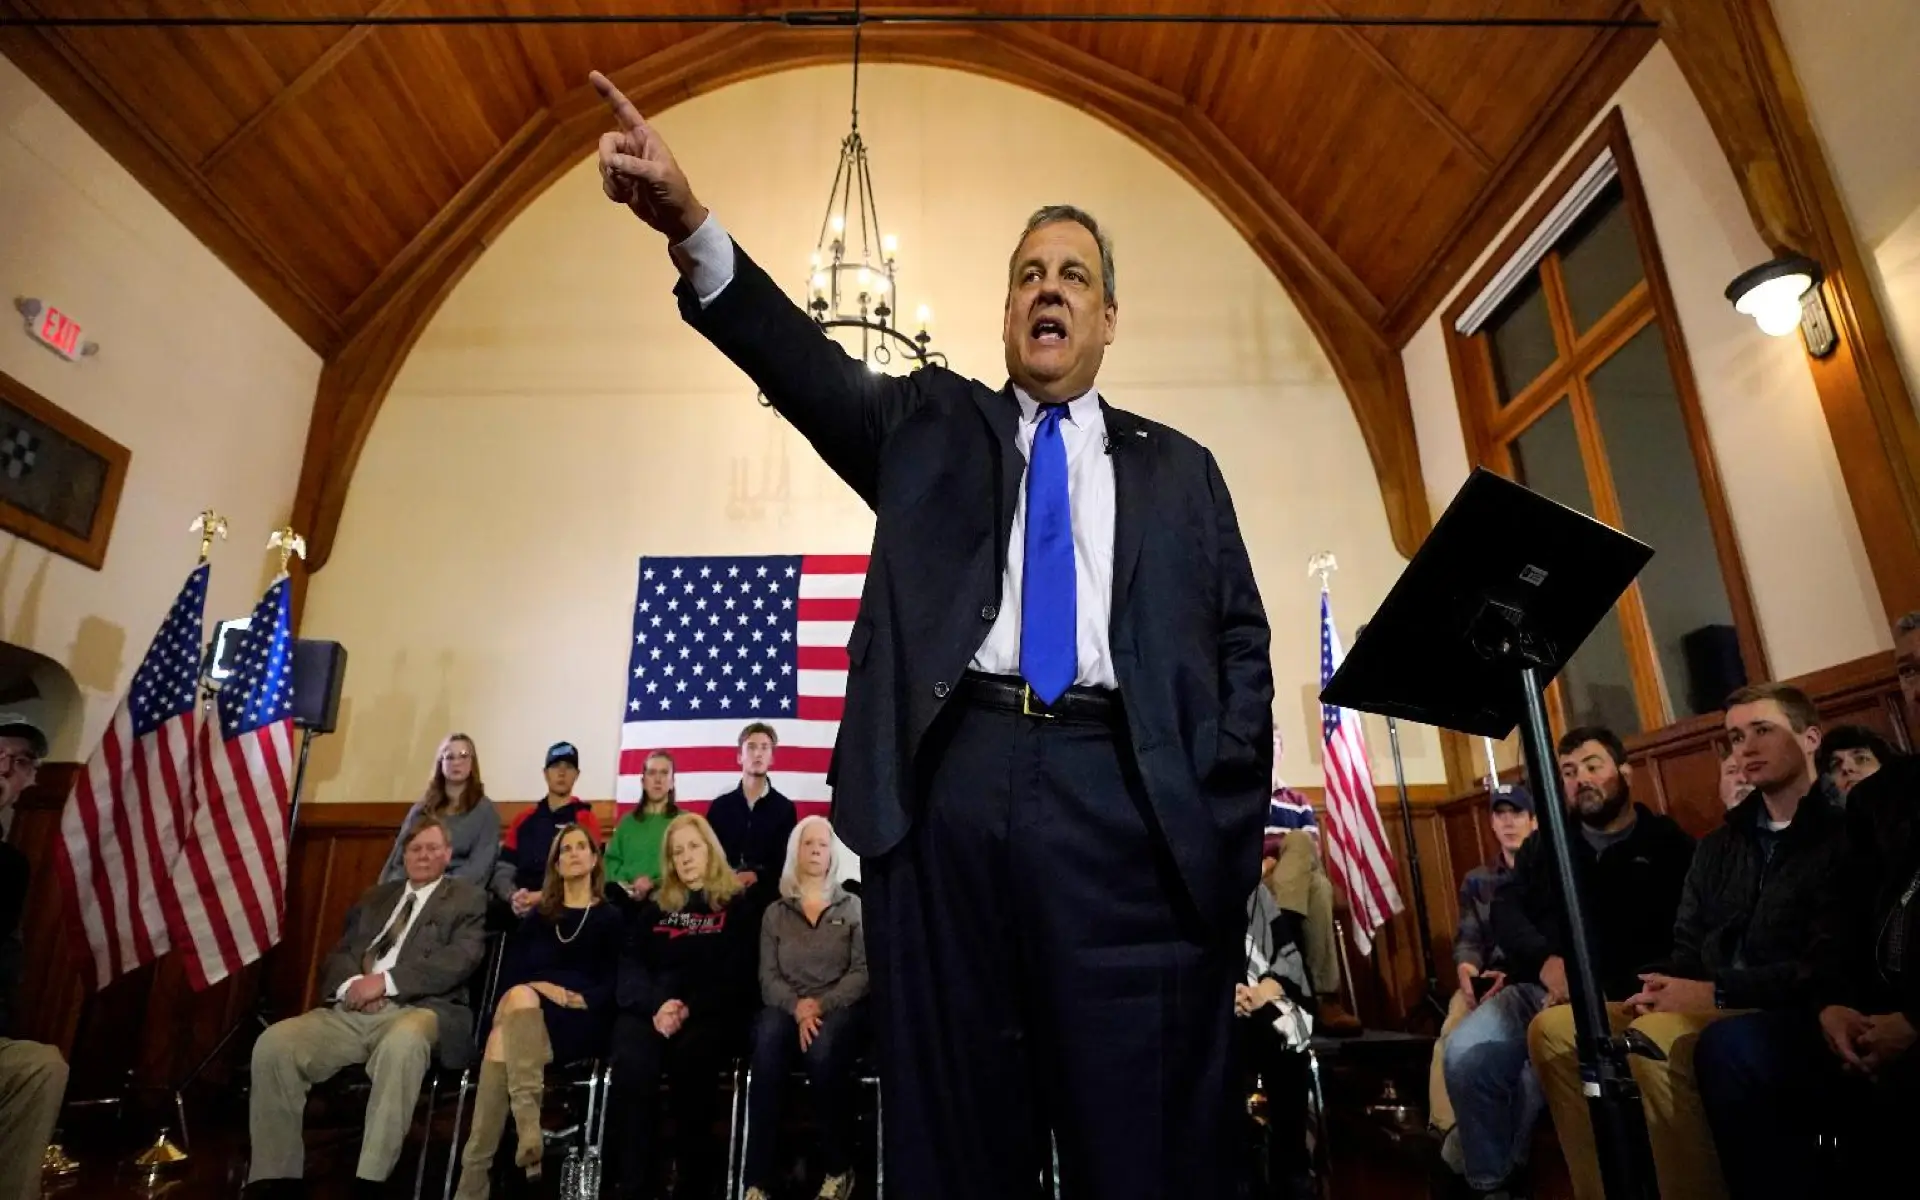 Chris Christie Drops Out of 2024 Presidential Race: A Major Shake-Up in the Republican Primary